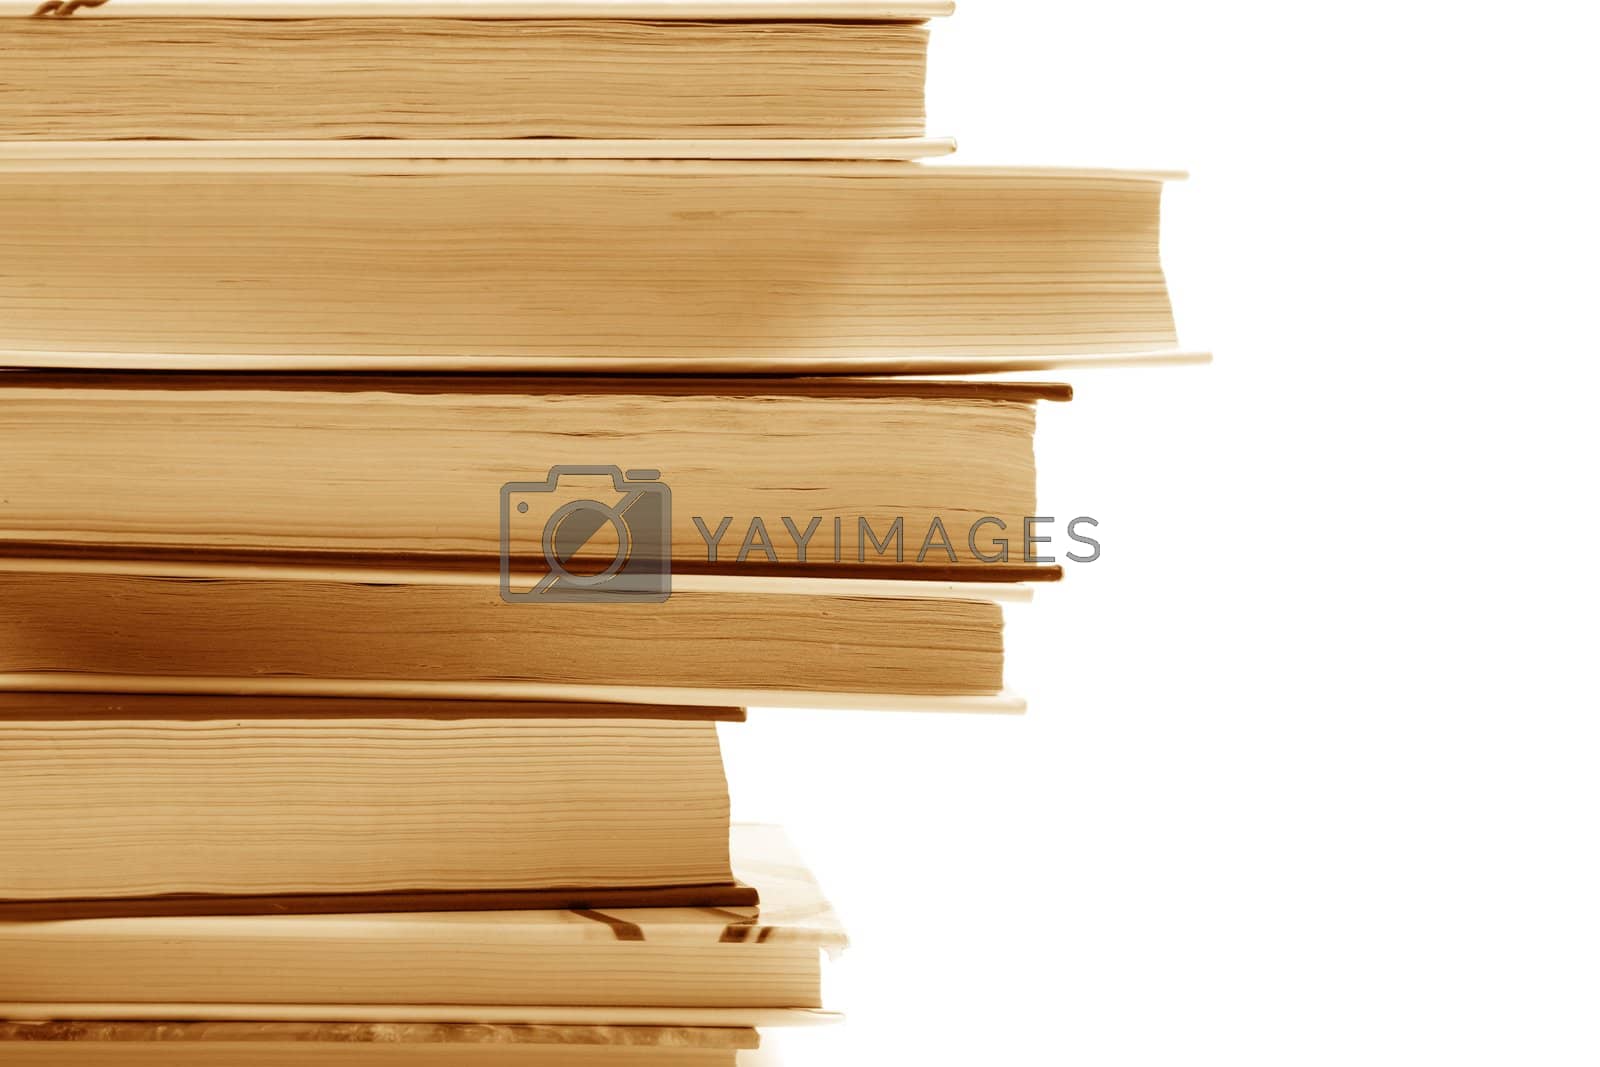 Royalty free image of stack of books by marylooo